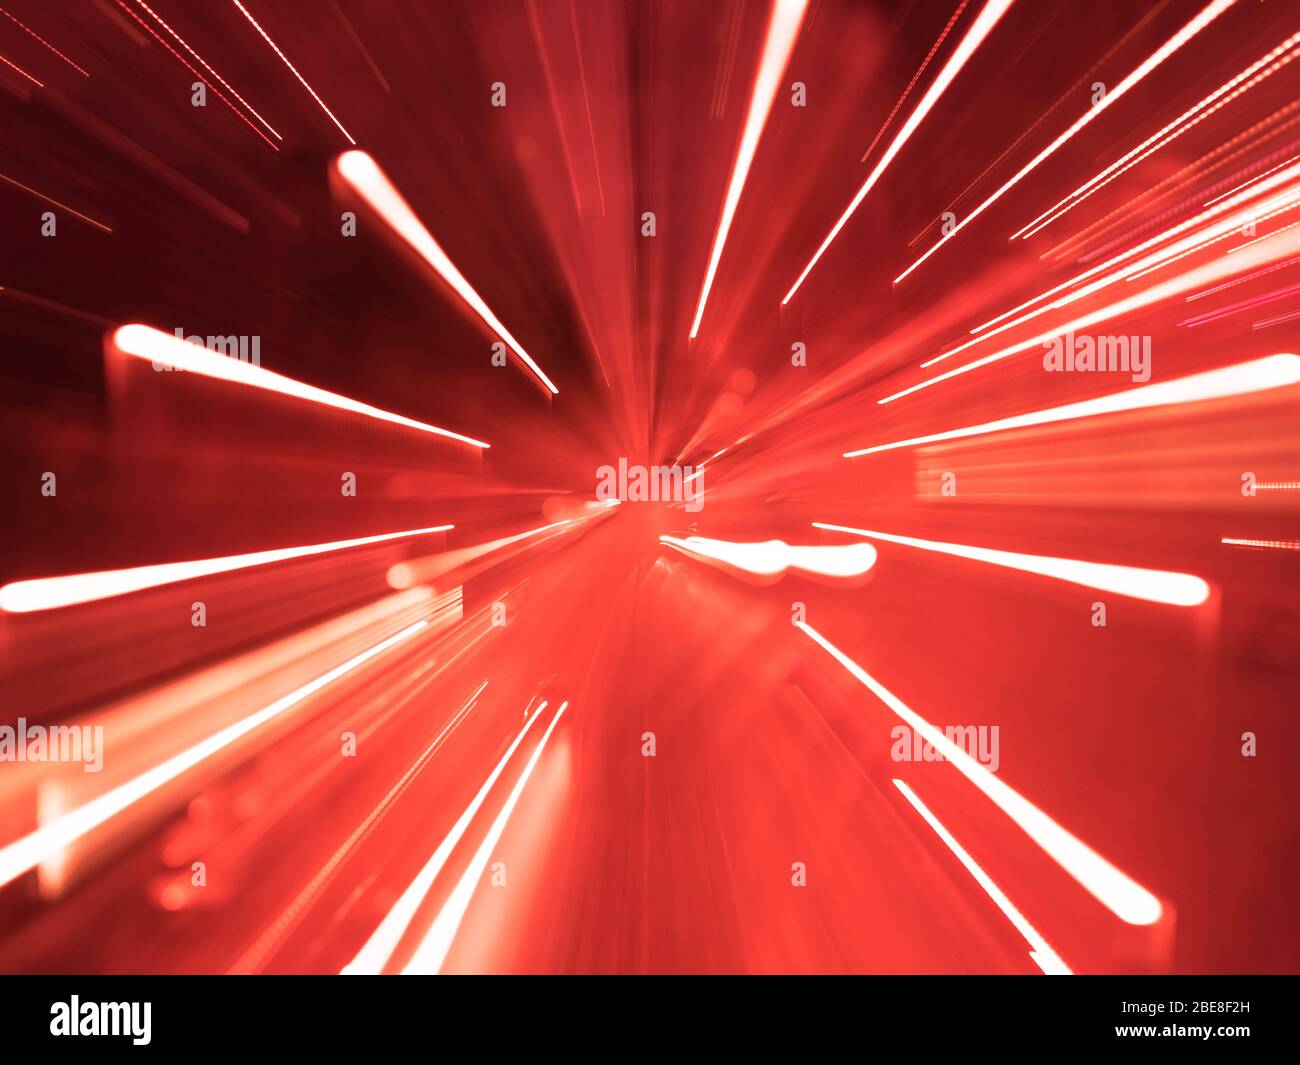 Colorful bright and energetic red graphic background Stock Photo